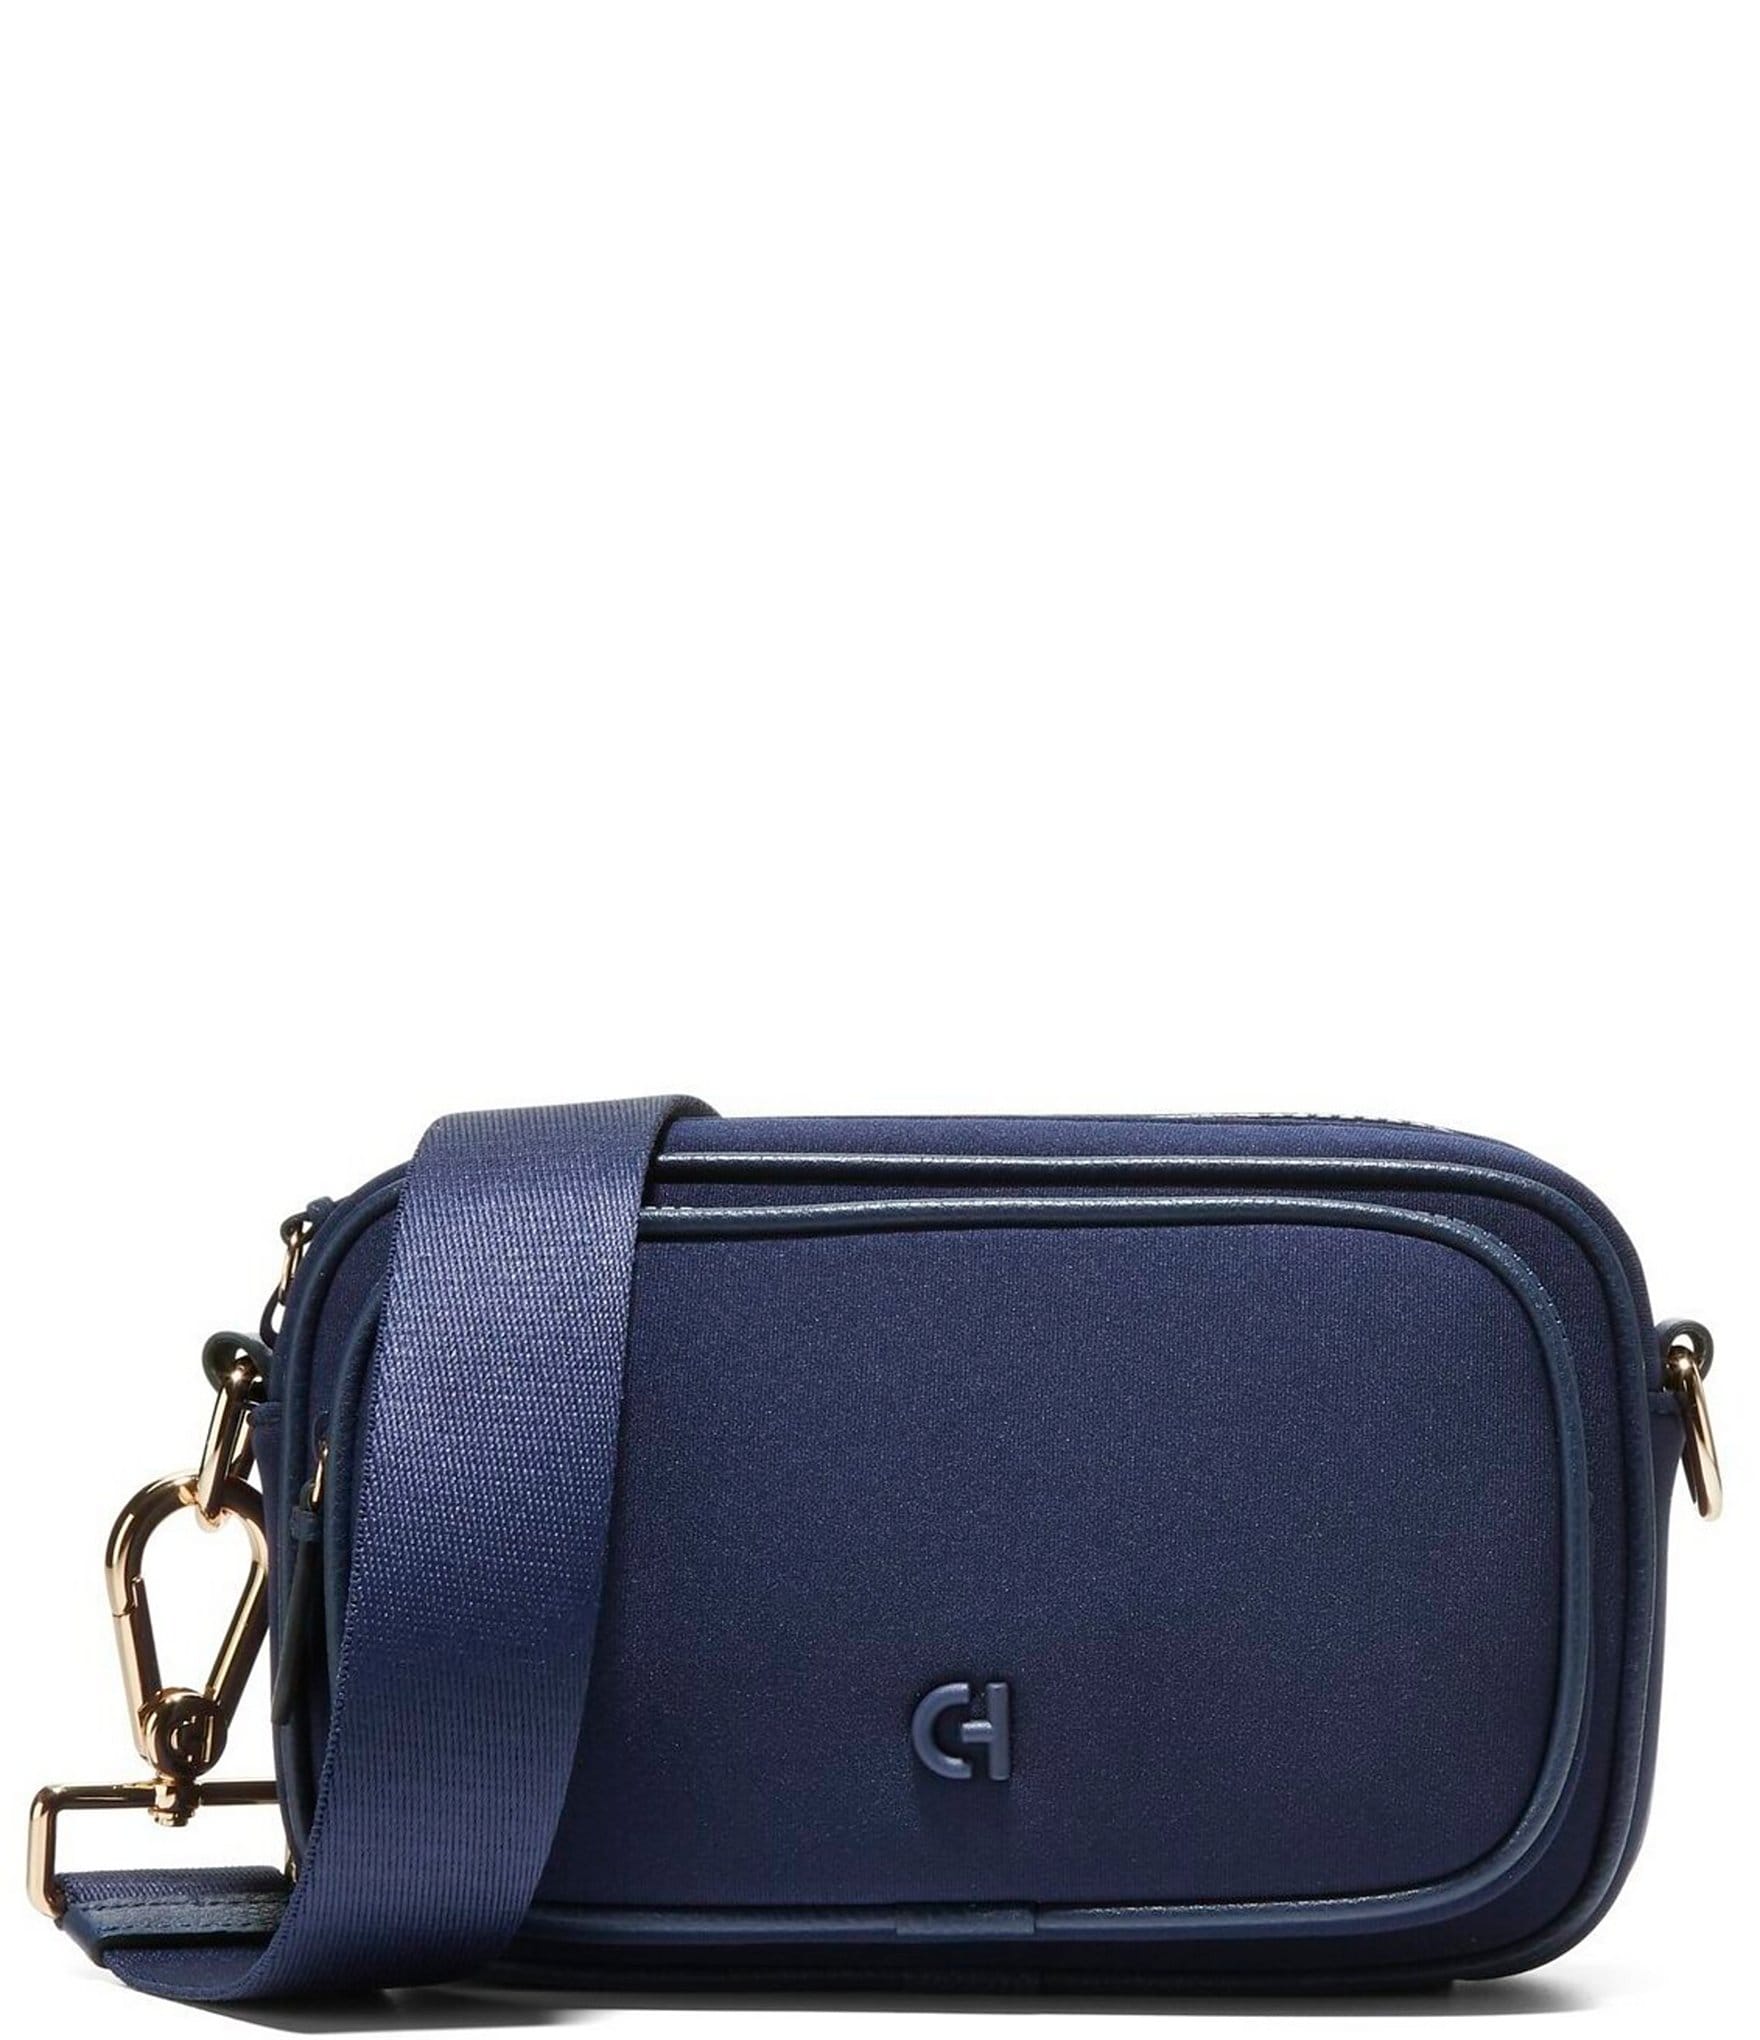 Longchamp Navy Le Foulonne Leather Bucket Bag, Best Price and Reviews